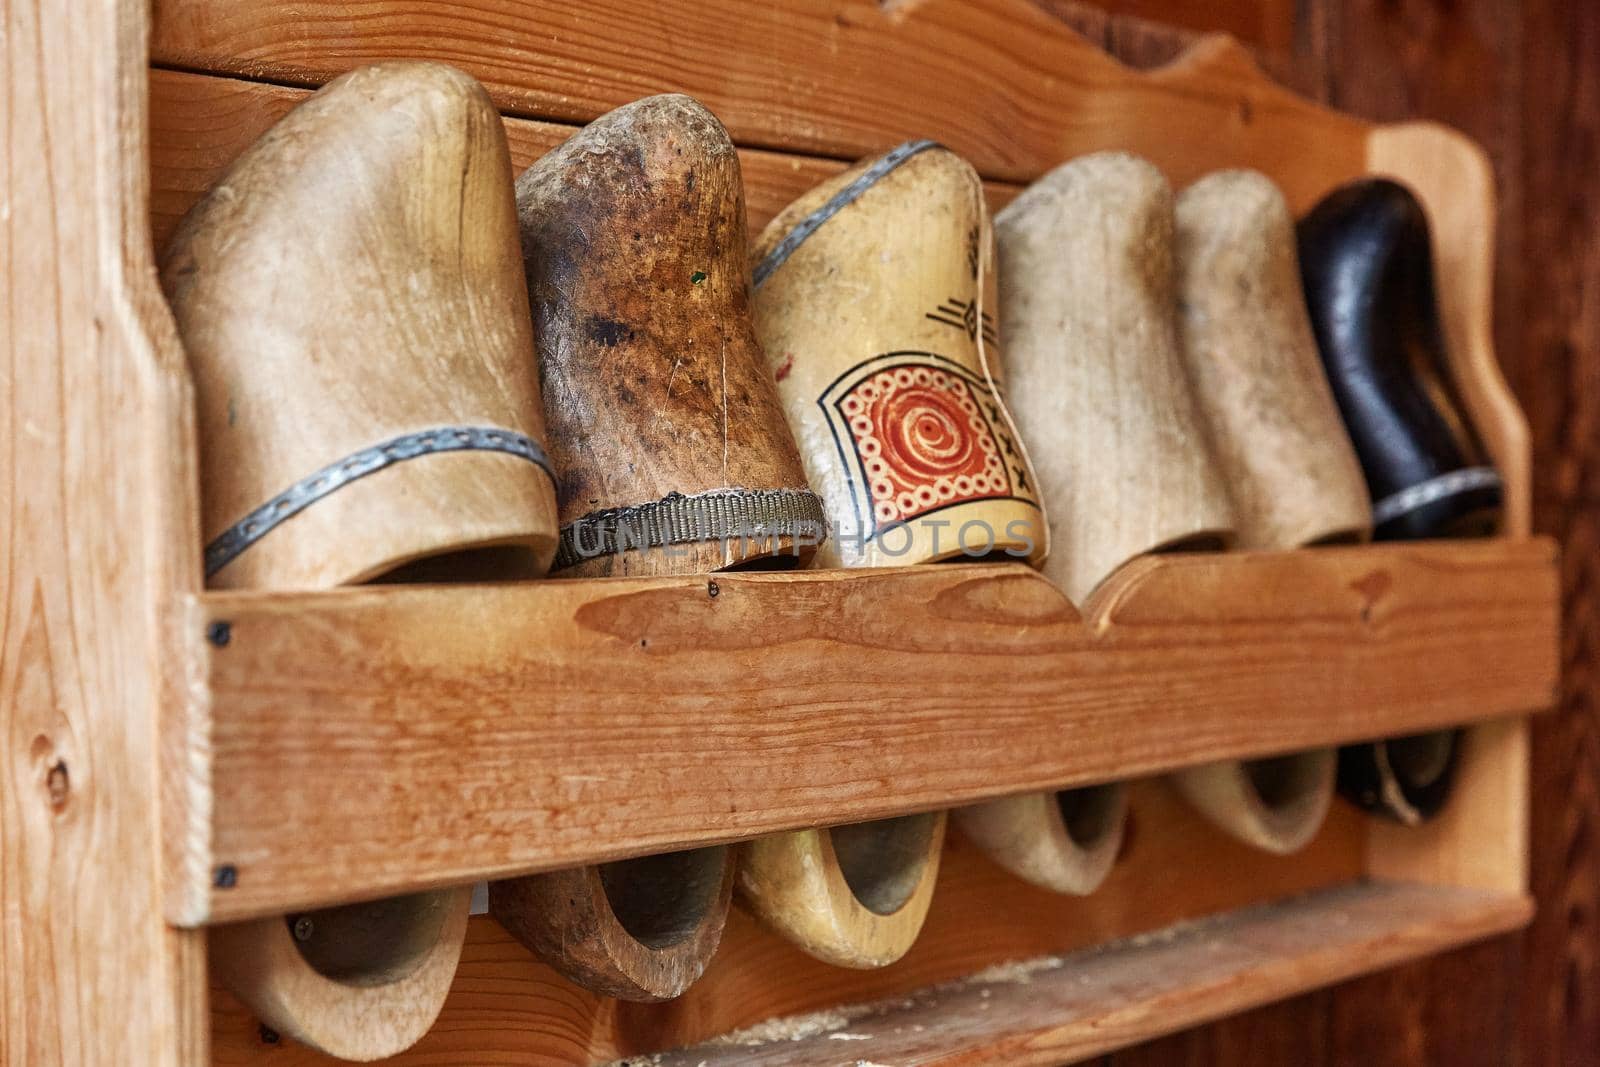 Colorful vintage hand painted wooden Dutch Clogs at Zaanse Schans, close to Amsterdam in Netherlands by wondry